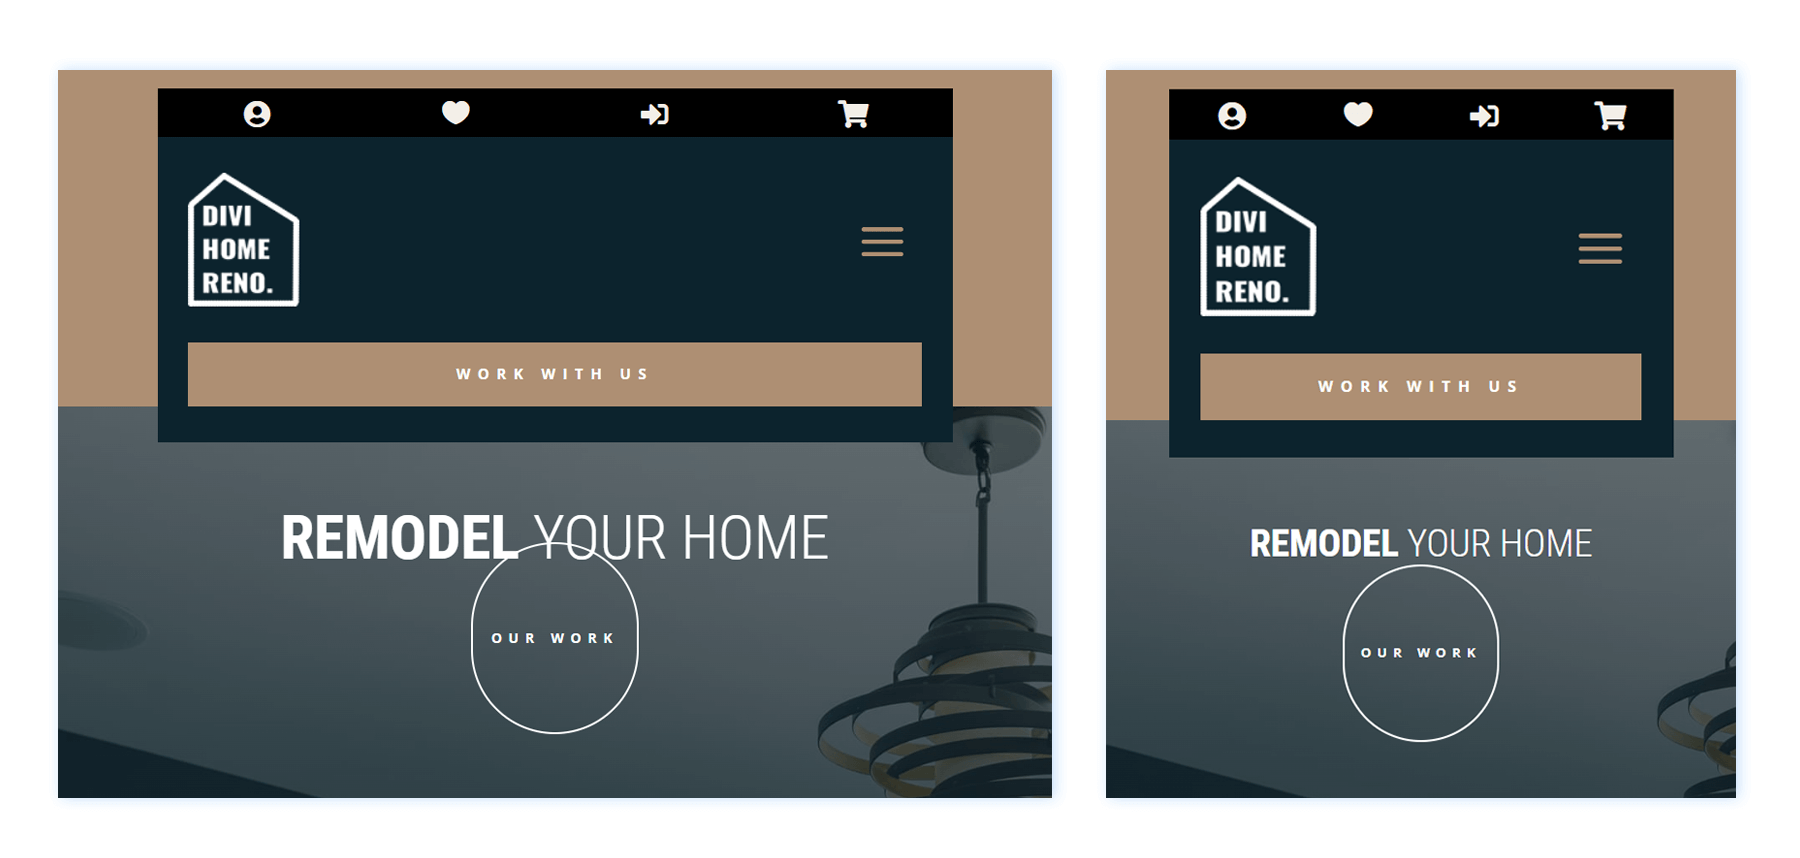 Divi Home Remodeling Header Template Tablet and Mobile View